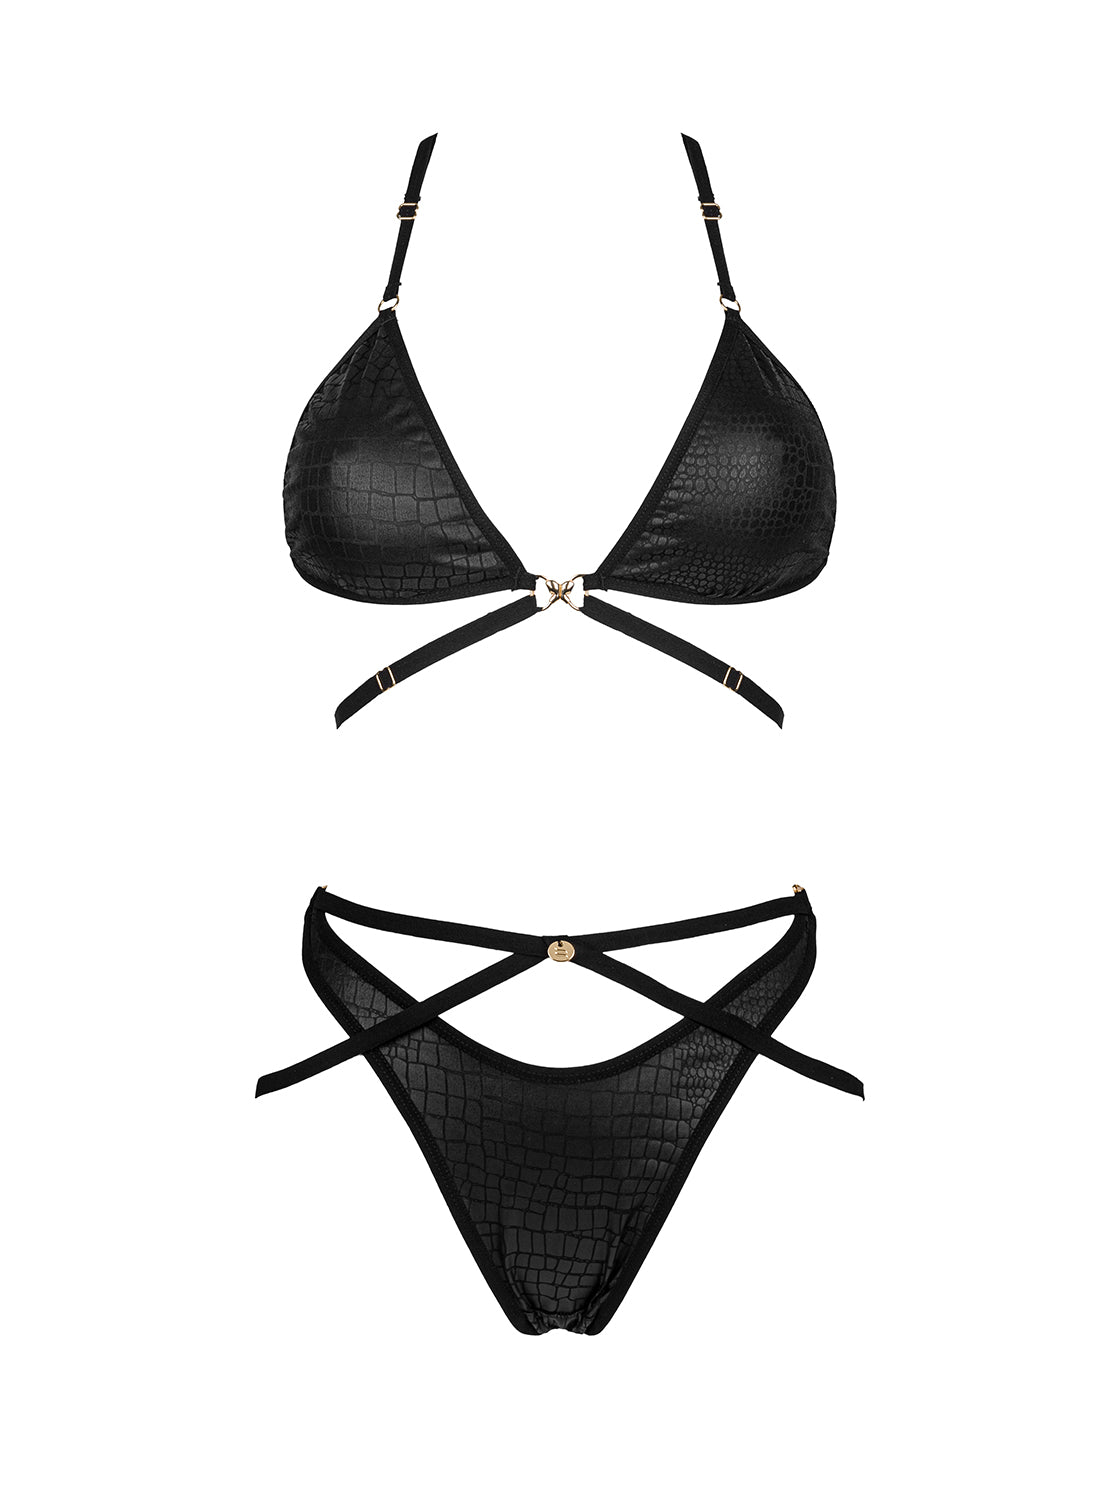 Cobra Nive a black set made of soft and elastic material with a subtle snake pattern and gold-colored details